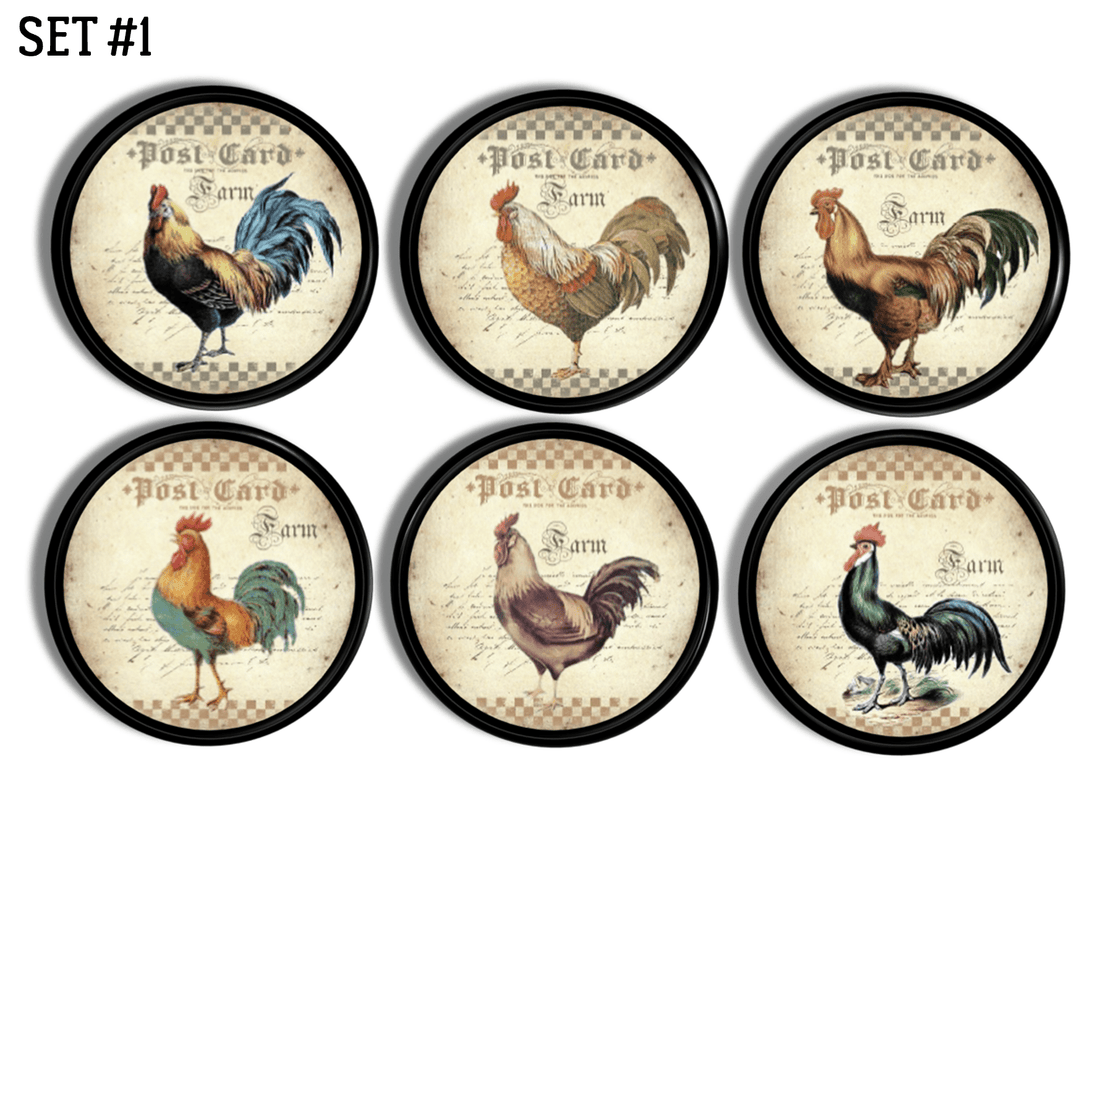 Colorful French Rooster and Chicken Themed Drawer Pulls made on a black base knob for kitchen cabinets, cupboards or drawers